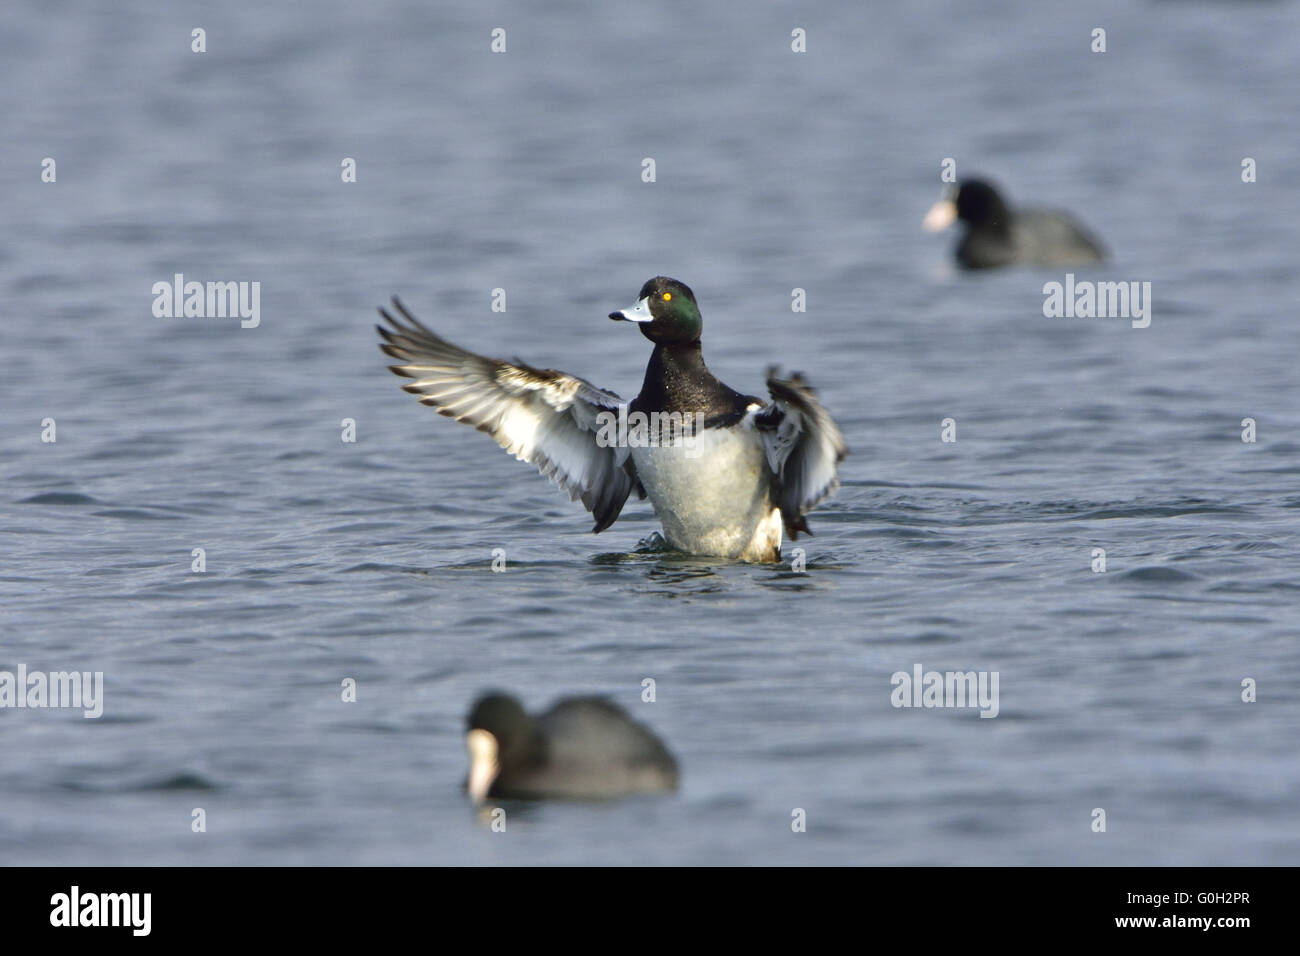 Tufted duck Stock Photo